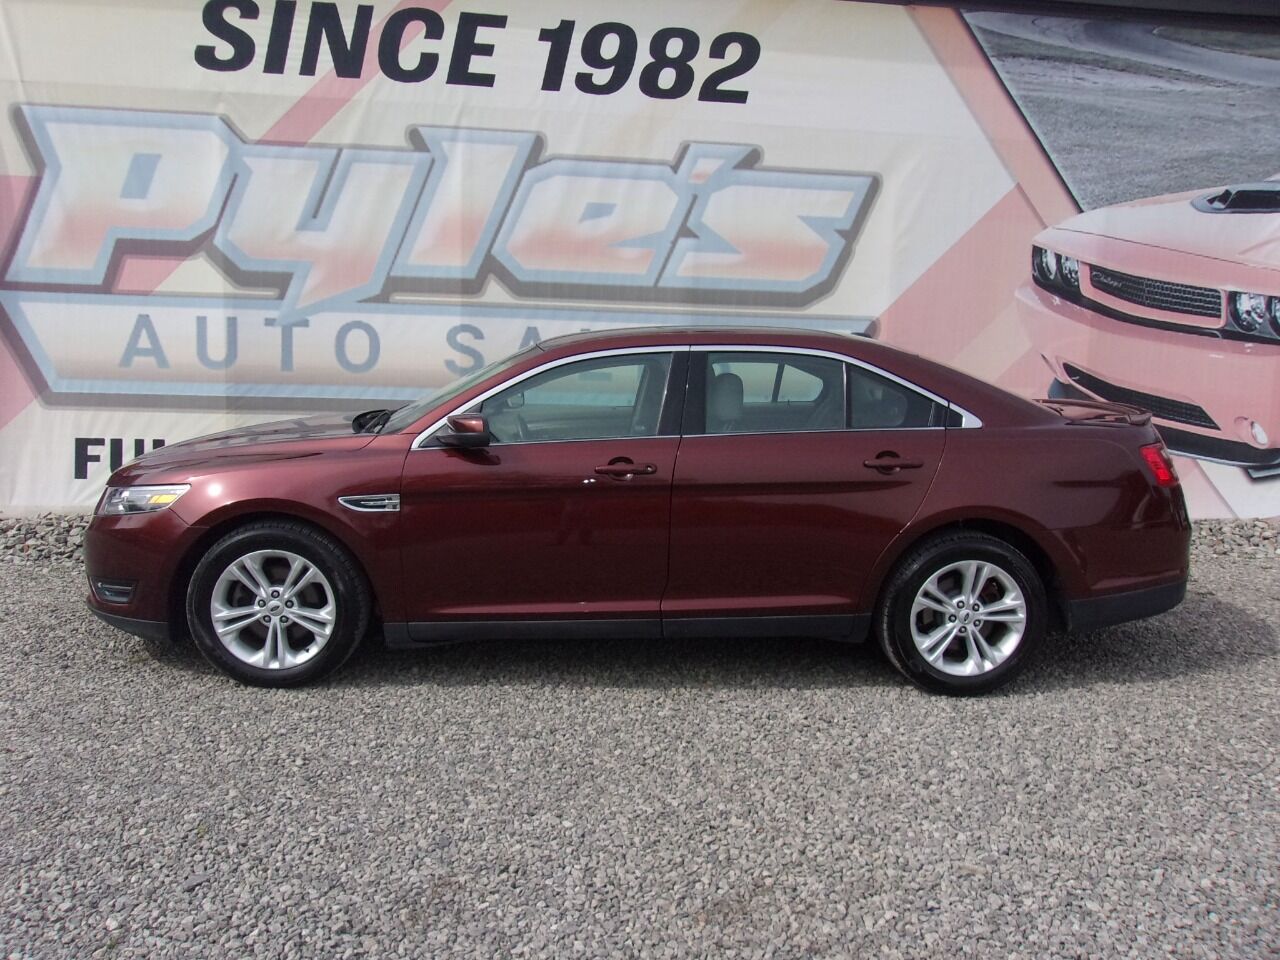 Ford Taurus For Sale In Pennsylvania - Carsforsale.com®